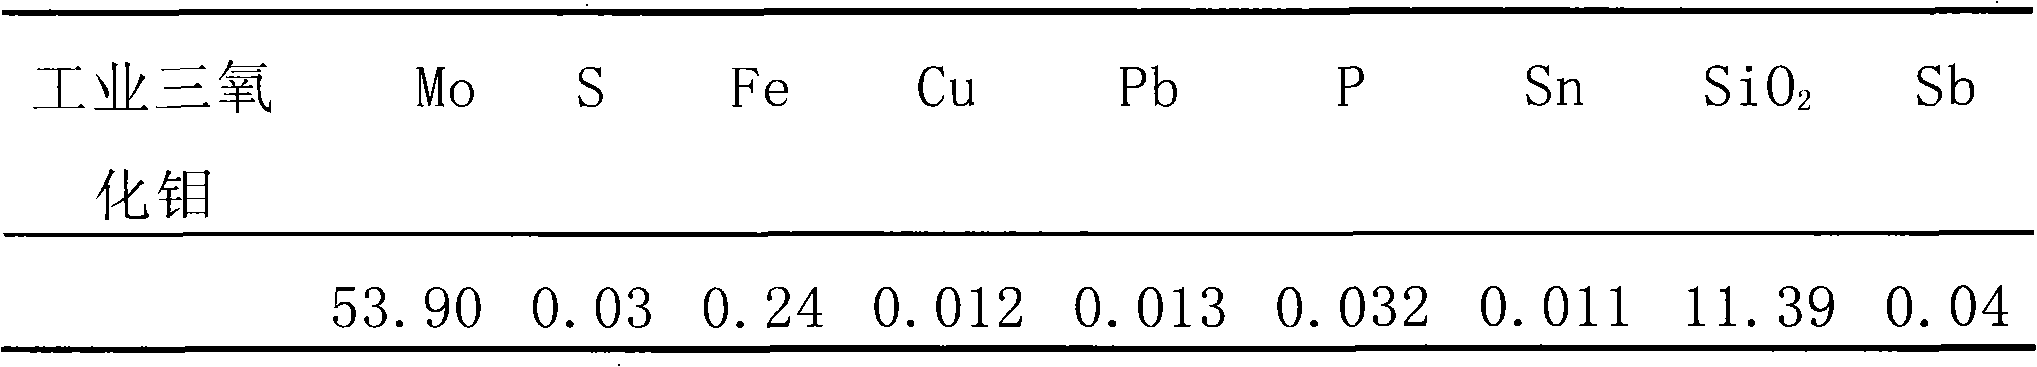 Method for producing industry molybdenum oxide from molybdenum concentrate